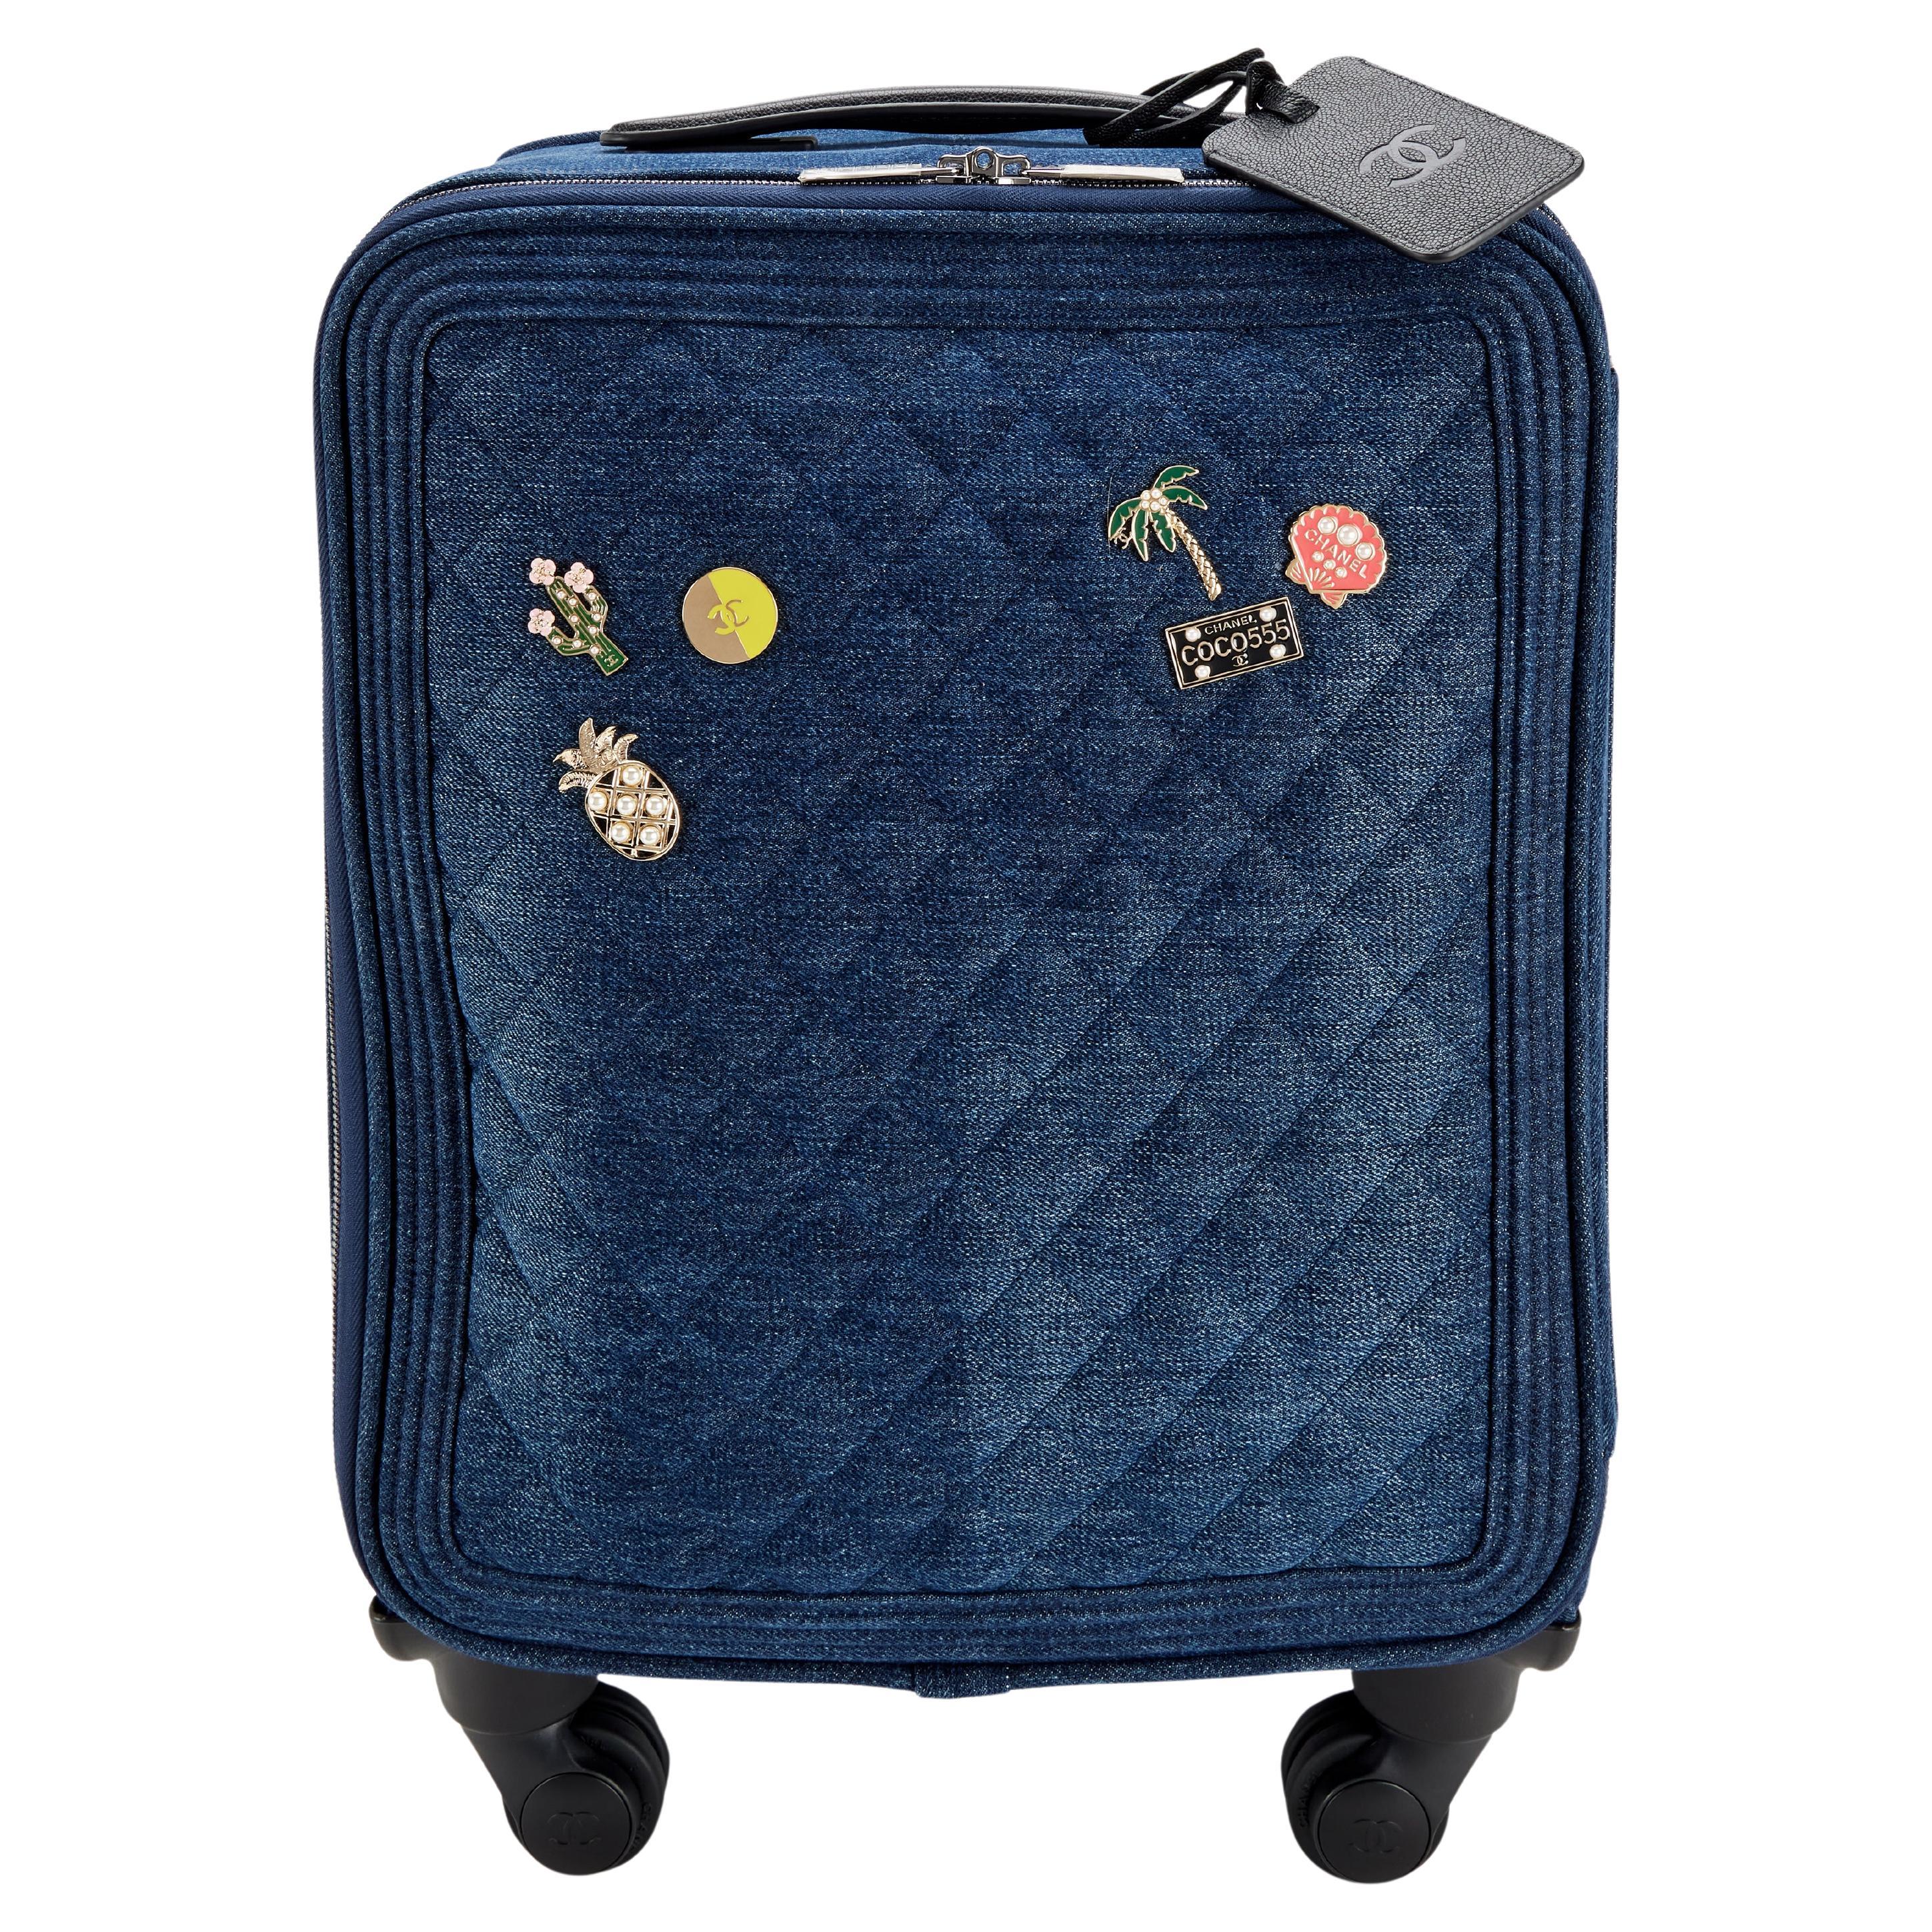 Chanel Coco Charm Denim Jean Trolley Travel Luggage Rolling Carry On Bag